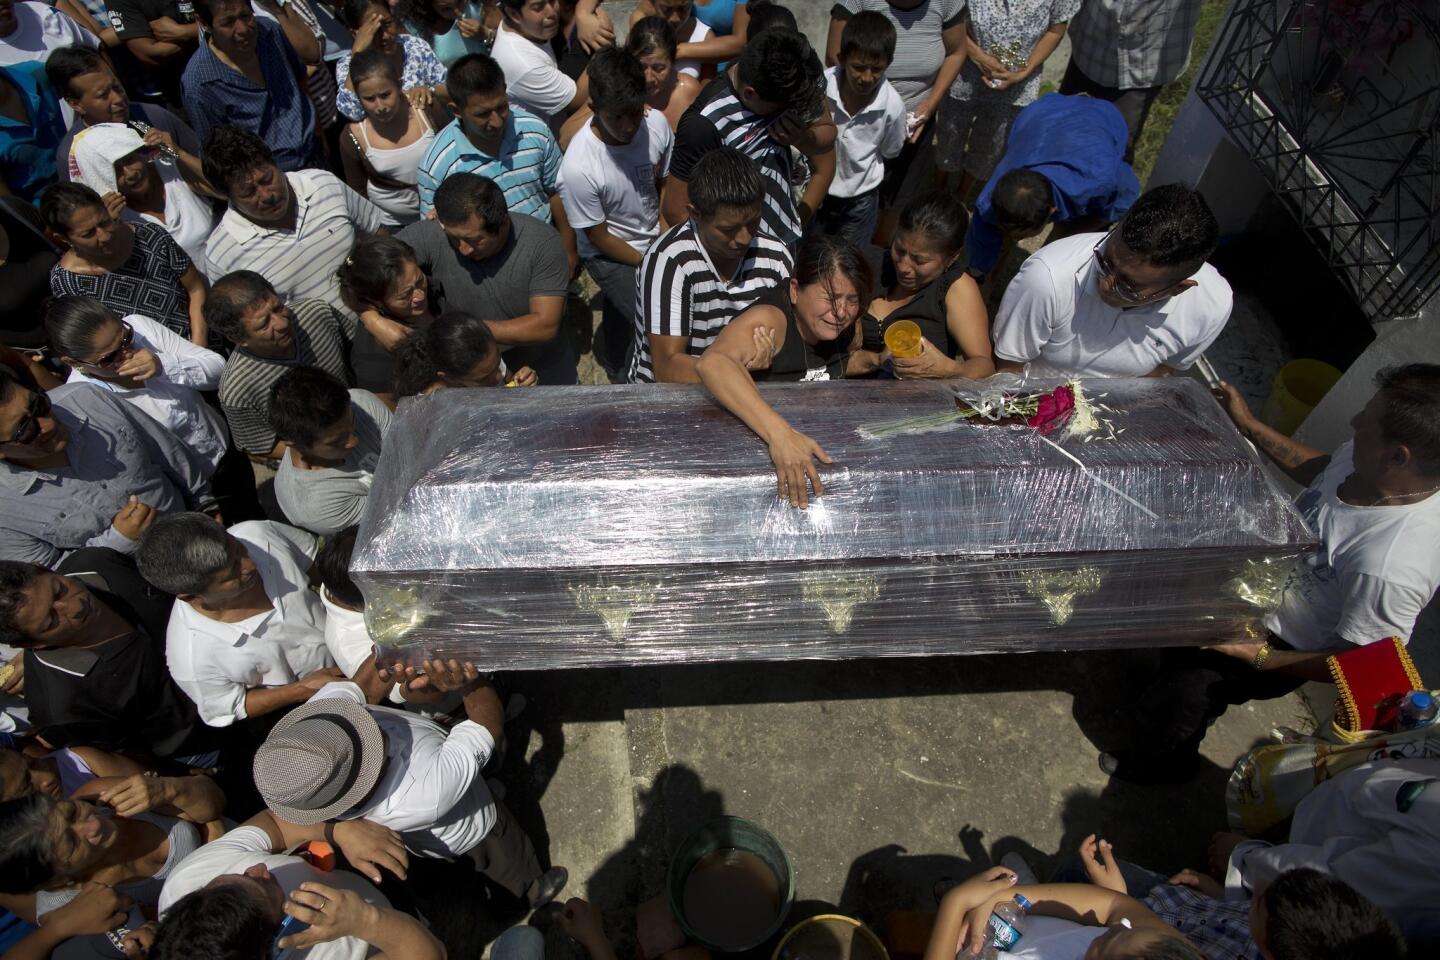 Relatives cry over the coffin of Kexly Valentino who died with her mother Gabriela and her brother Alex in the earthquake, in Montecristi, Ecuador, Tuesday, April 19, 2016.